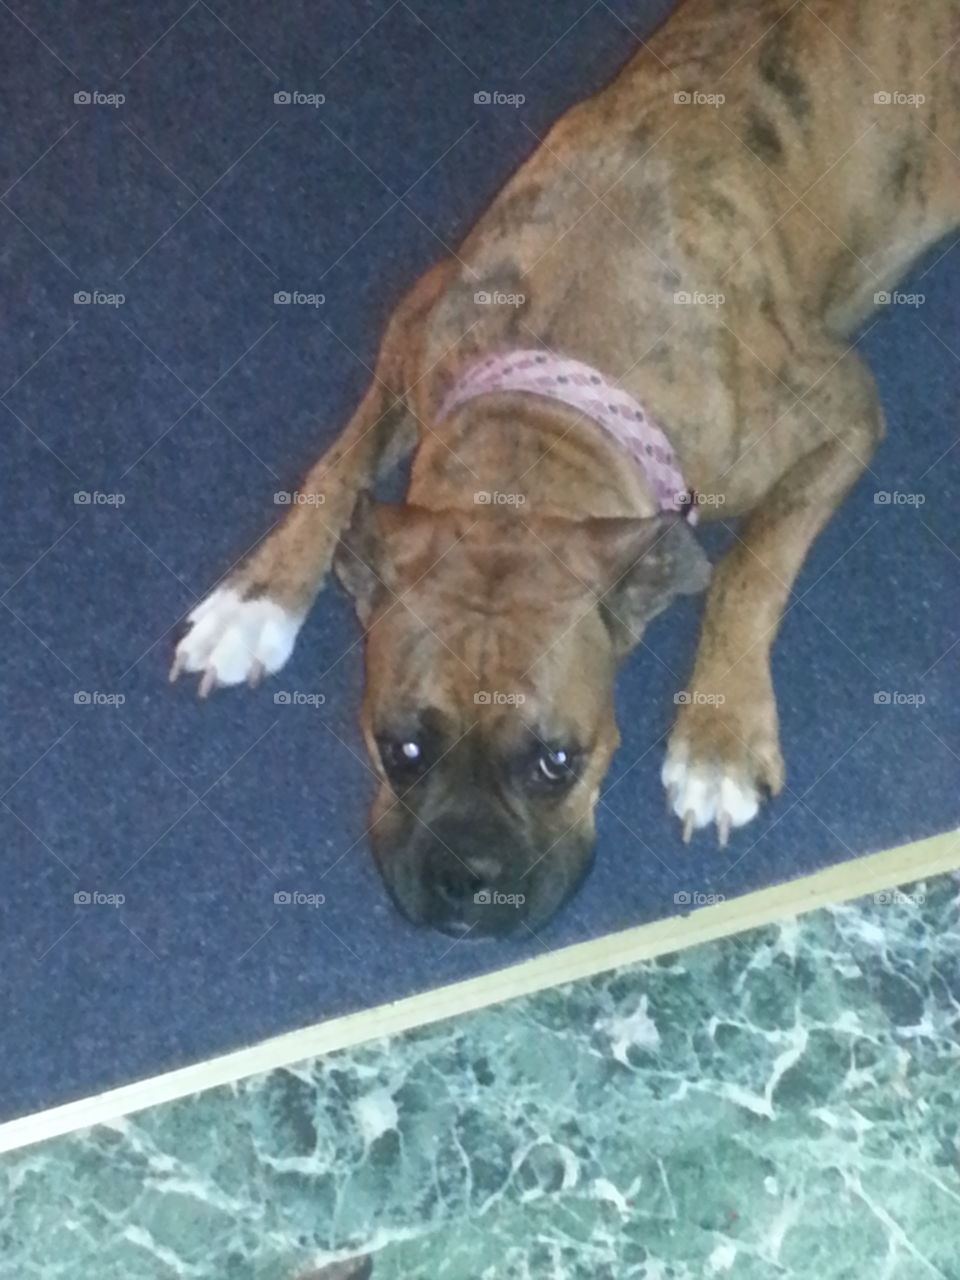 lexi. she was pouting for some chicken I was cooking